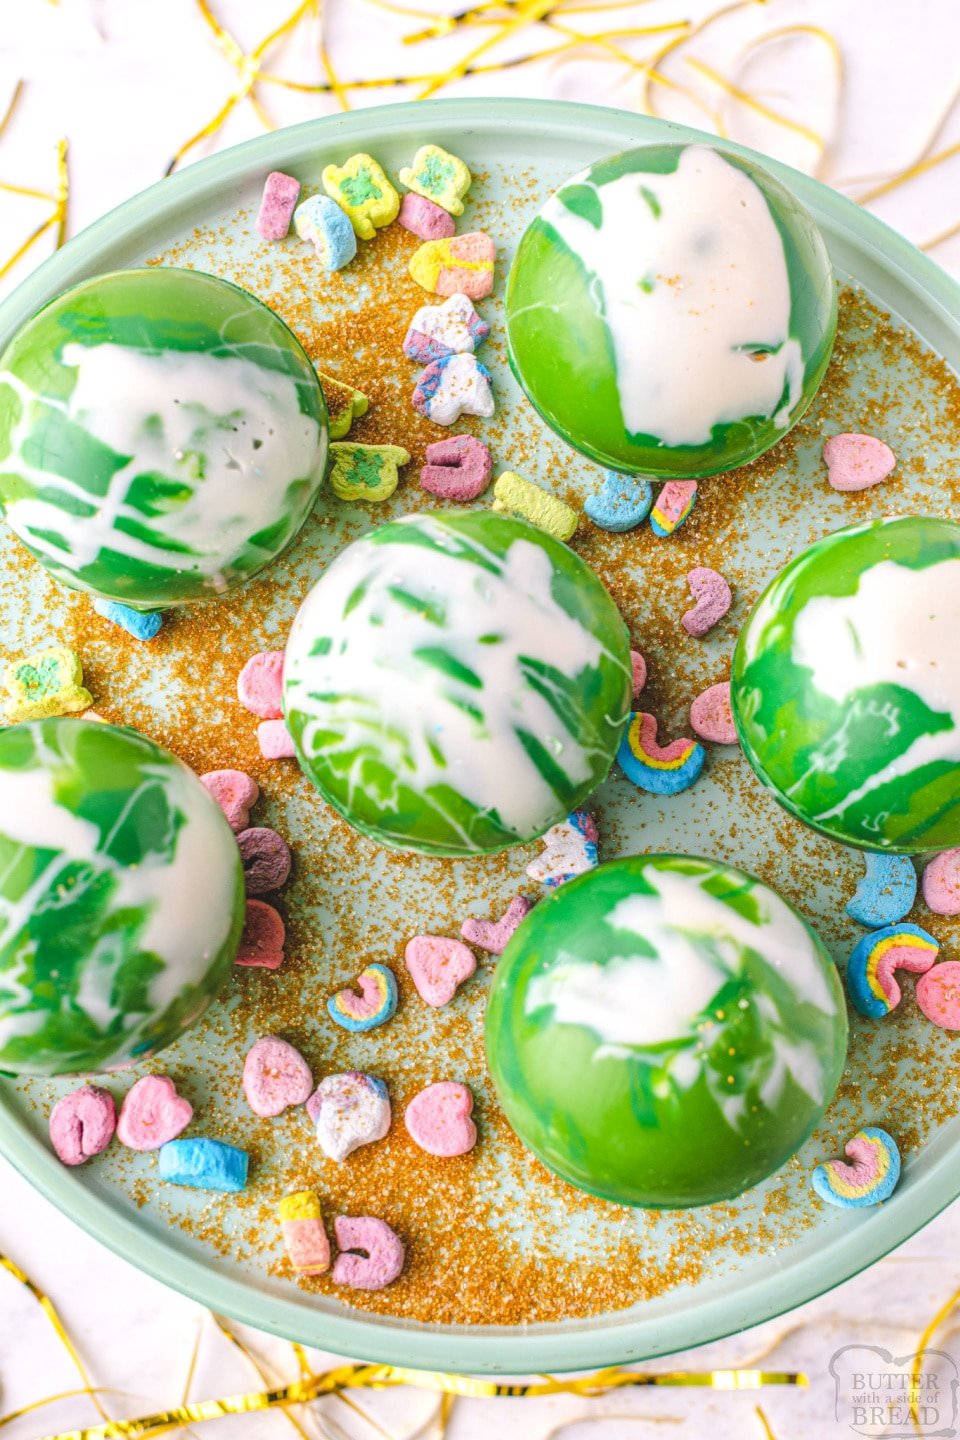 Festive St. Patrick's Day Hot Chocolate Bombs with Lucky Charms marshmallows